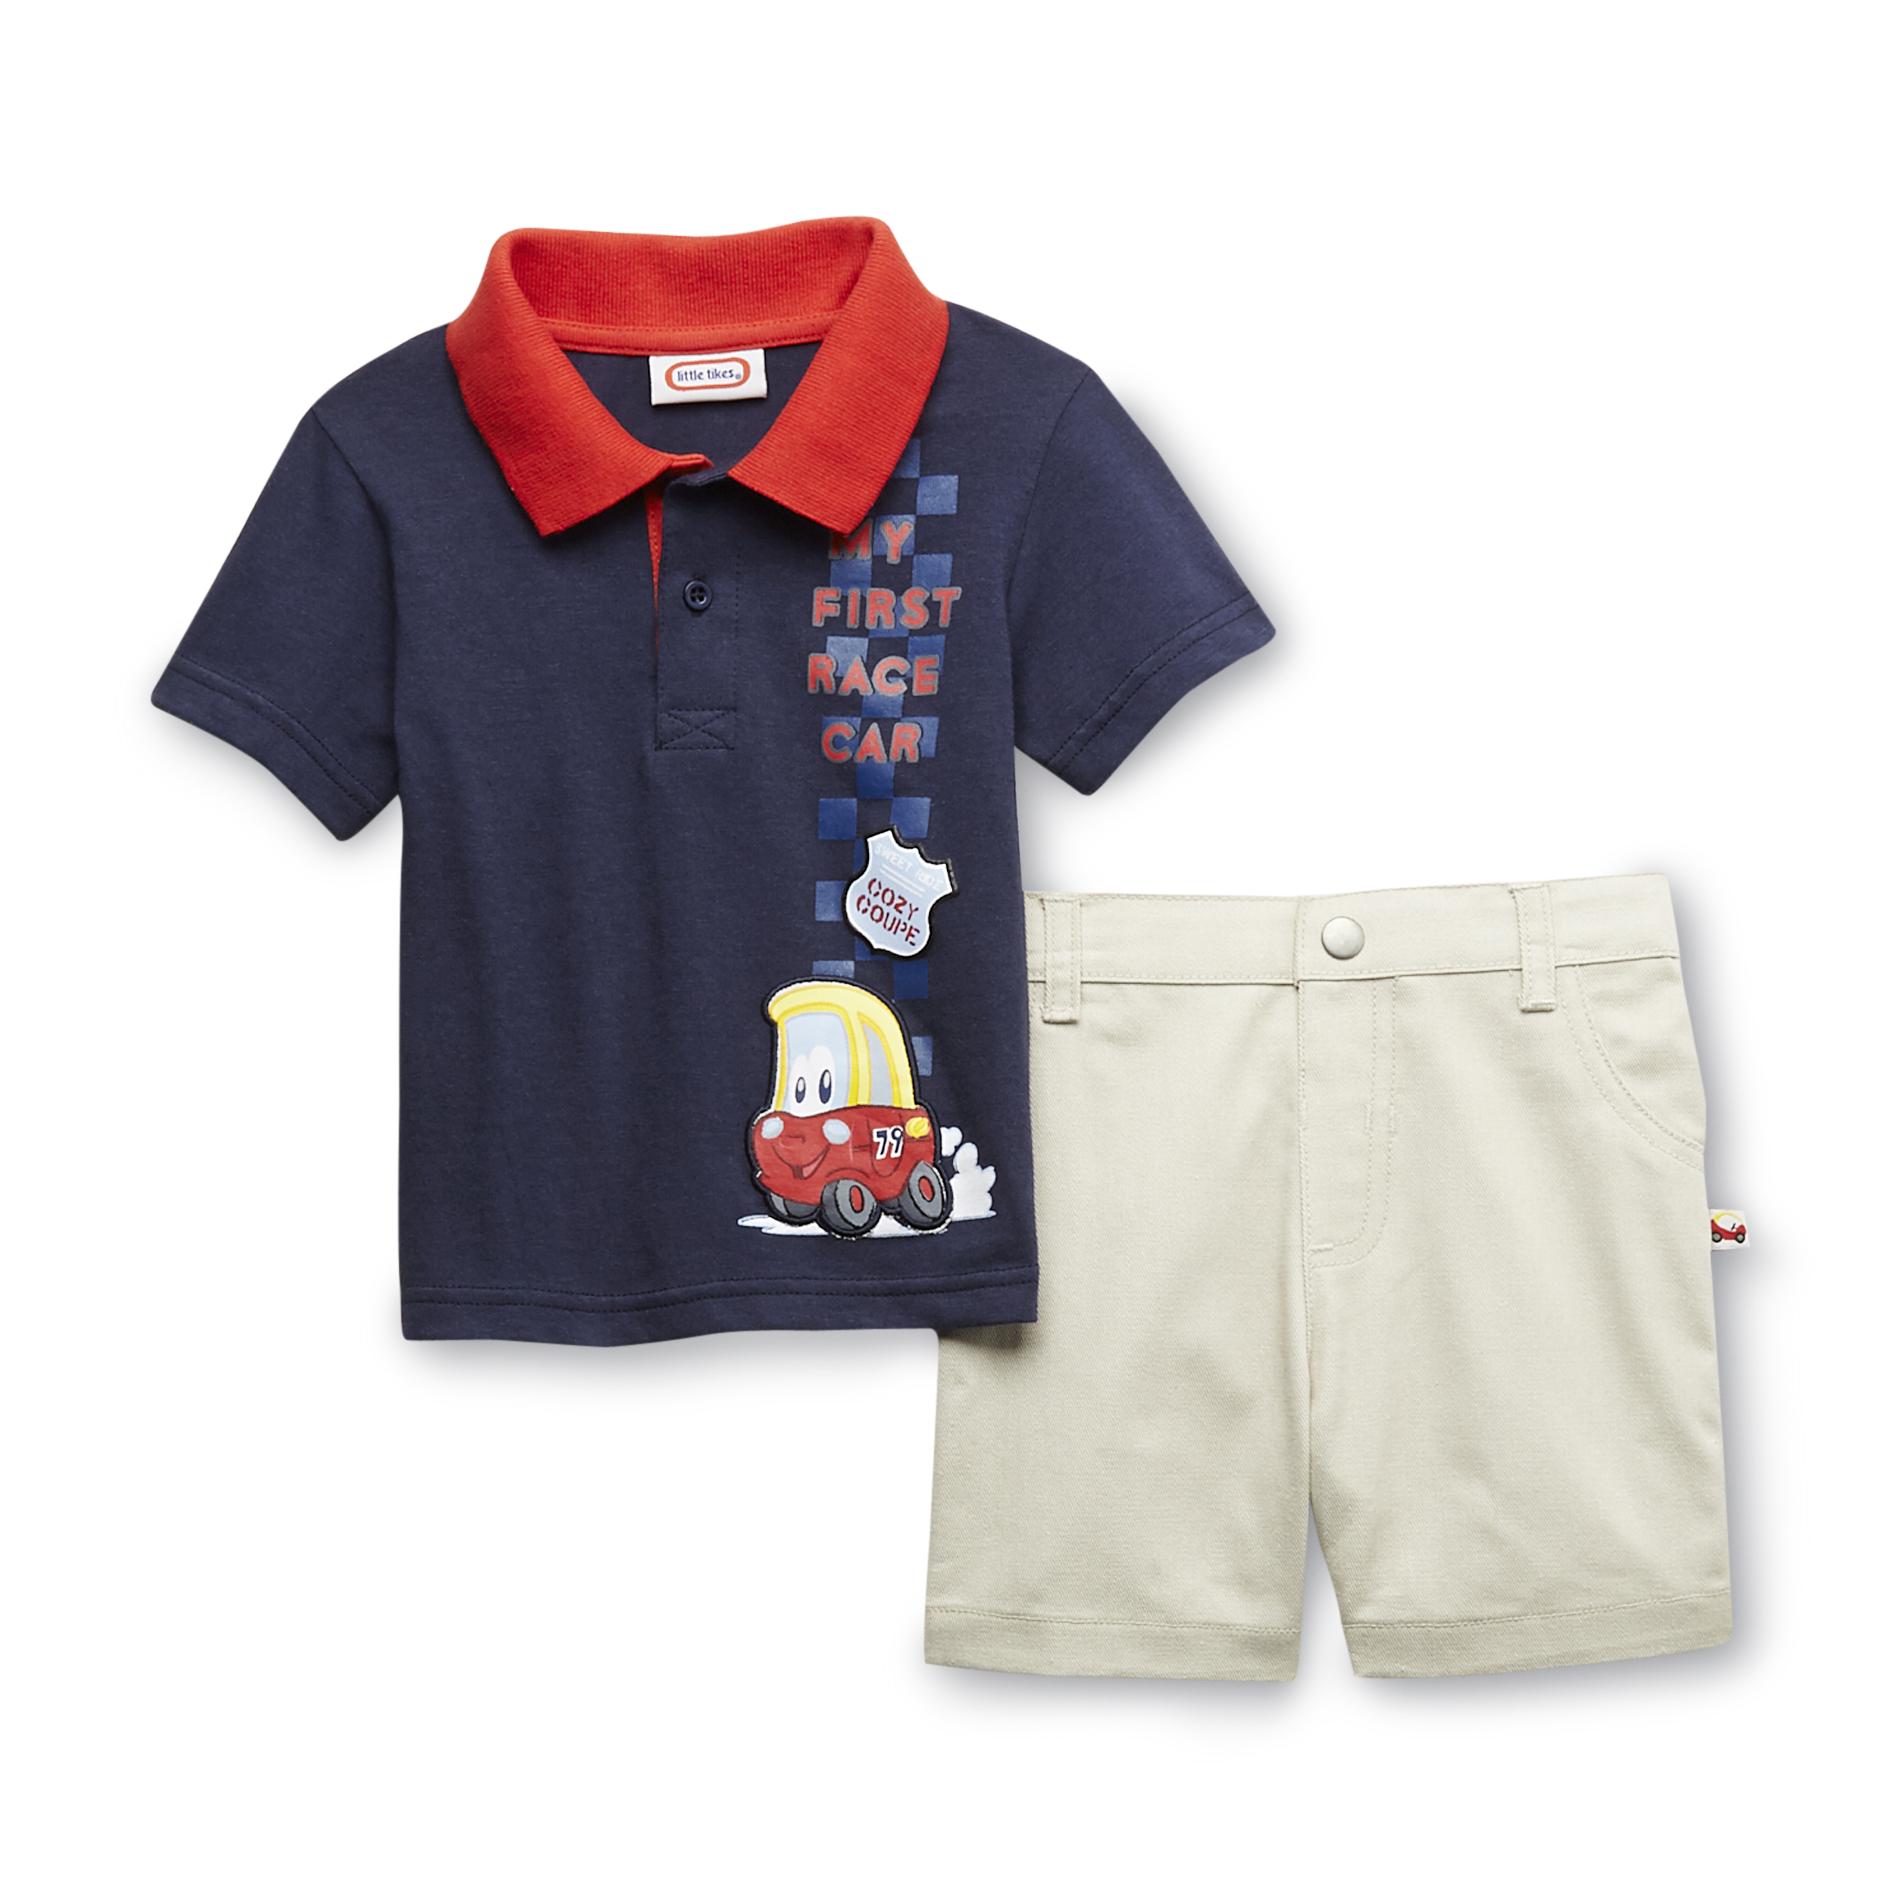 Little Tikes Infant Boy's Polo Shirt & Twill Shorts - My First Race Car